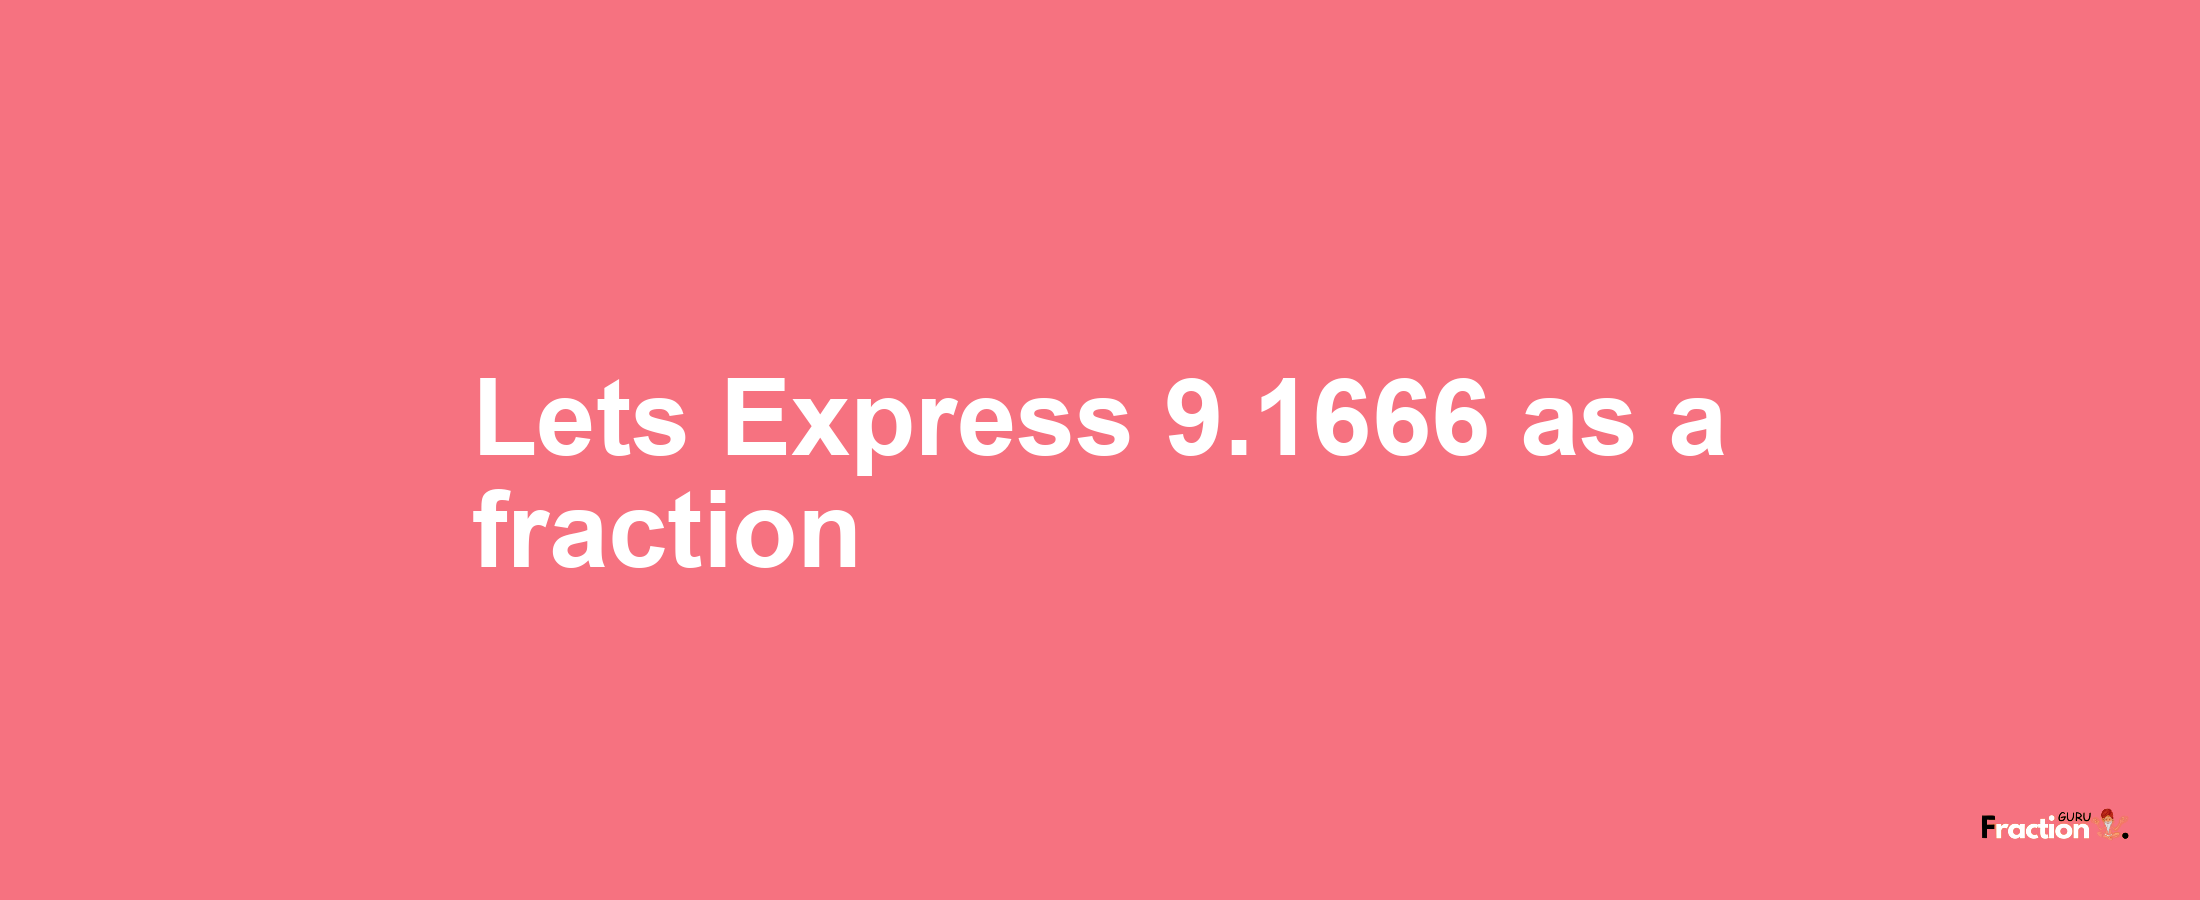 Lets Express 9.1666 as afraction